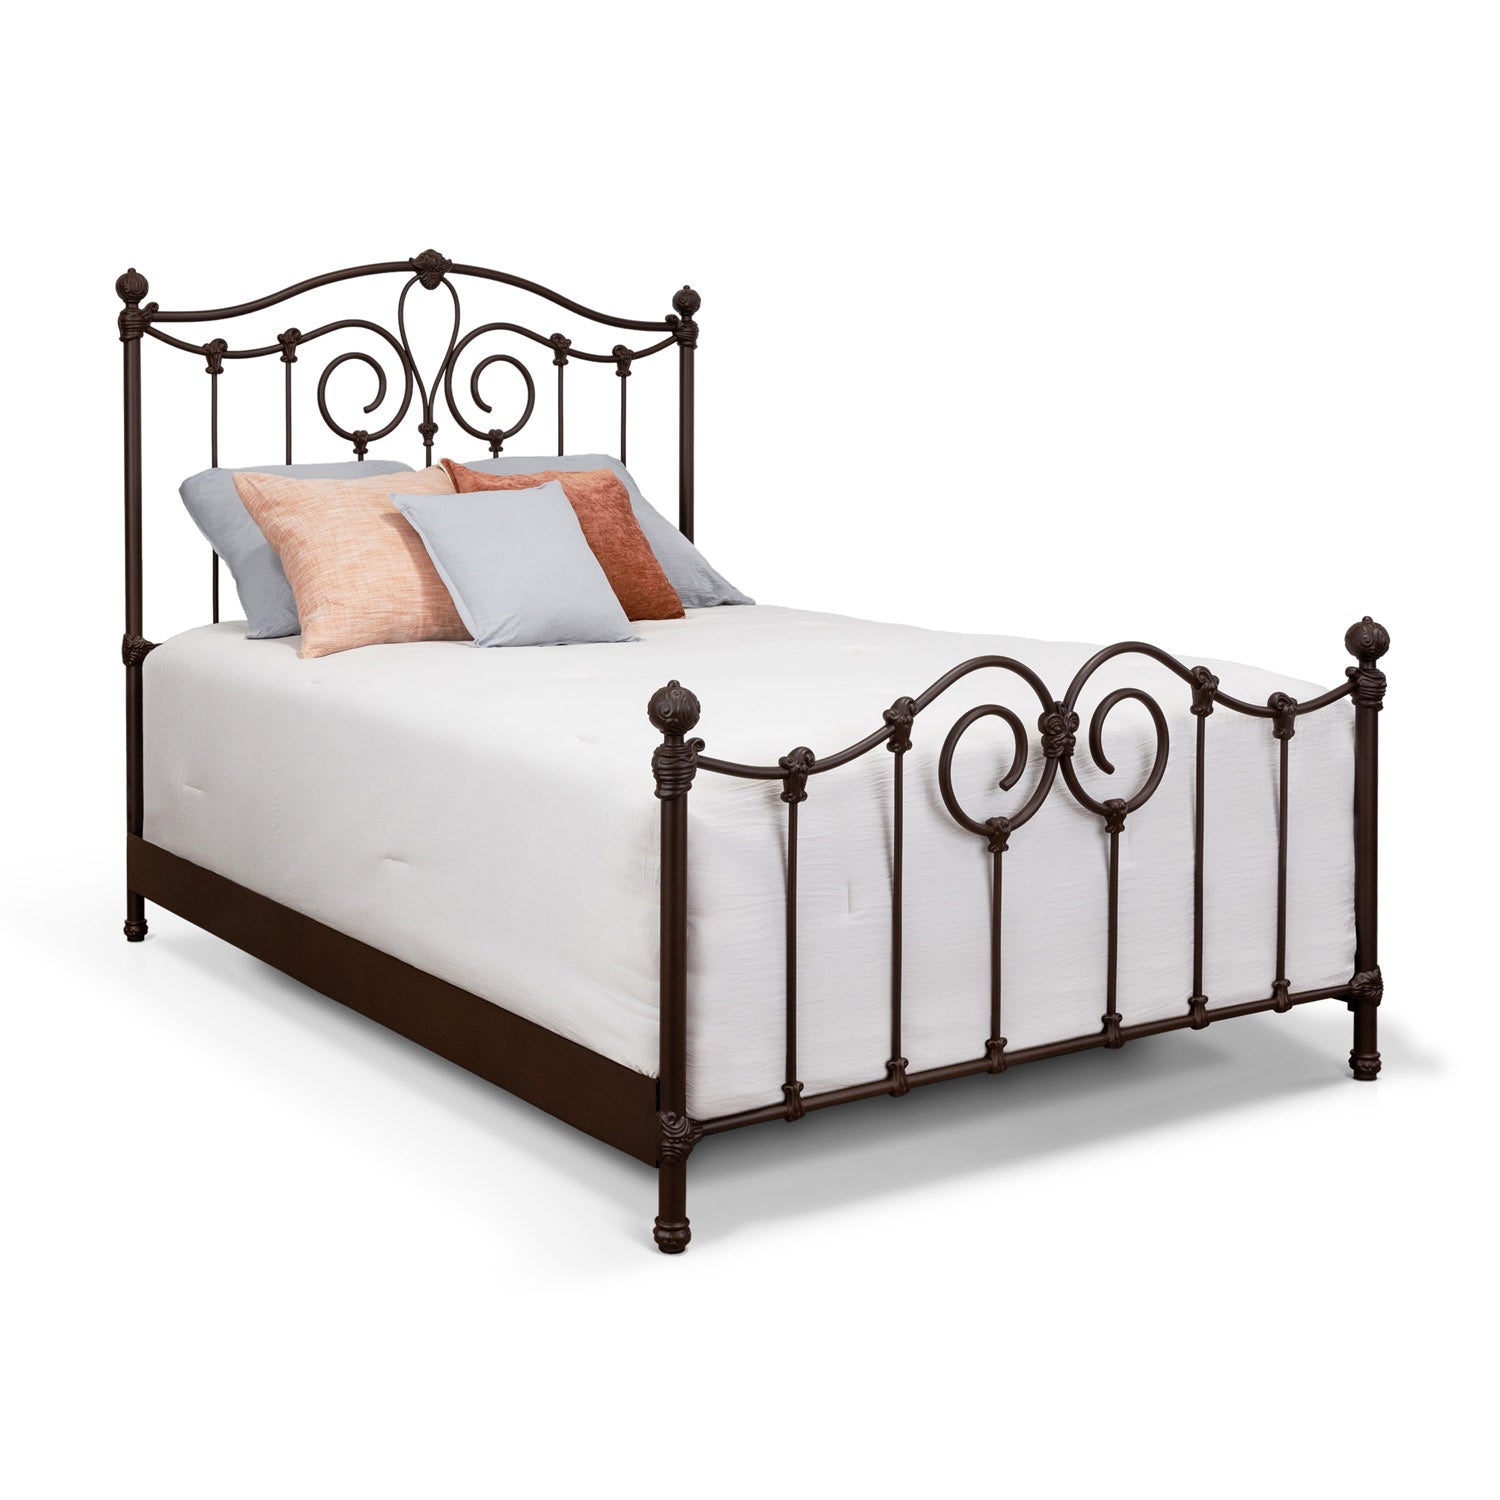 Olympia Cast Bed